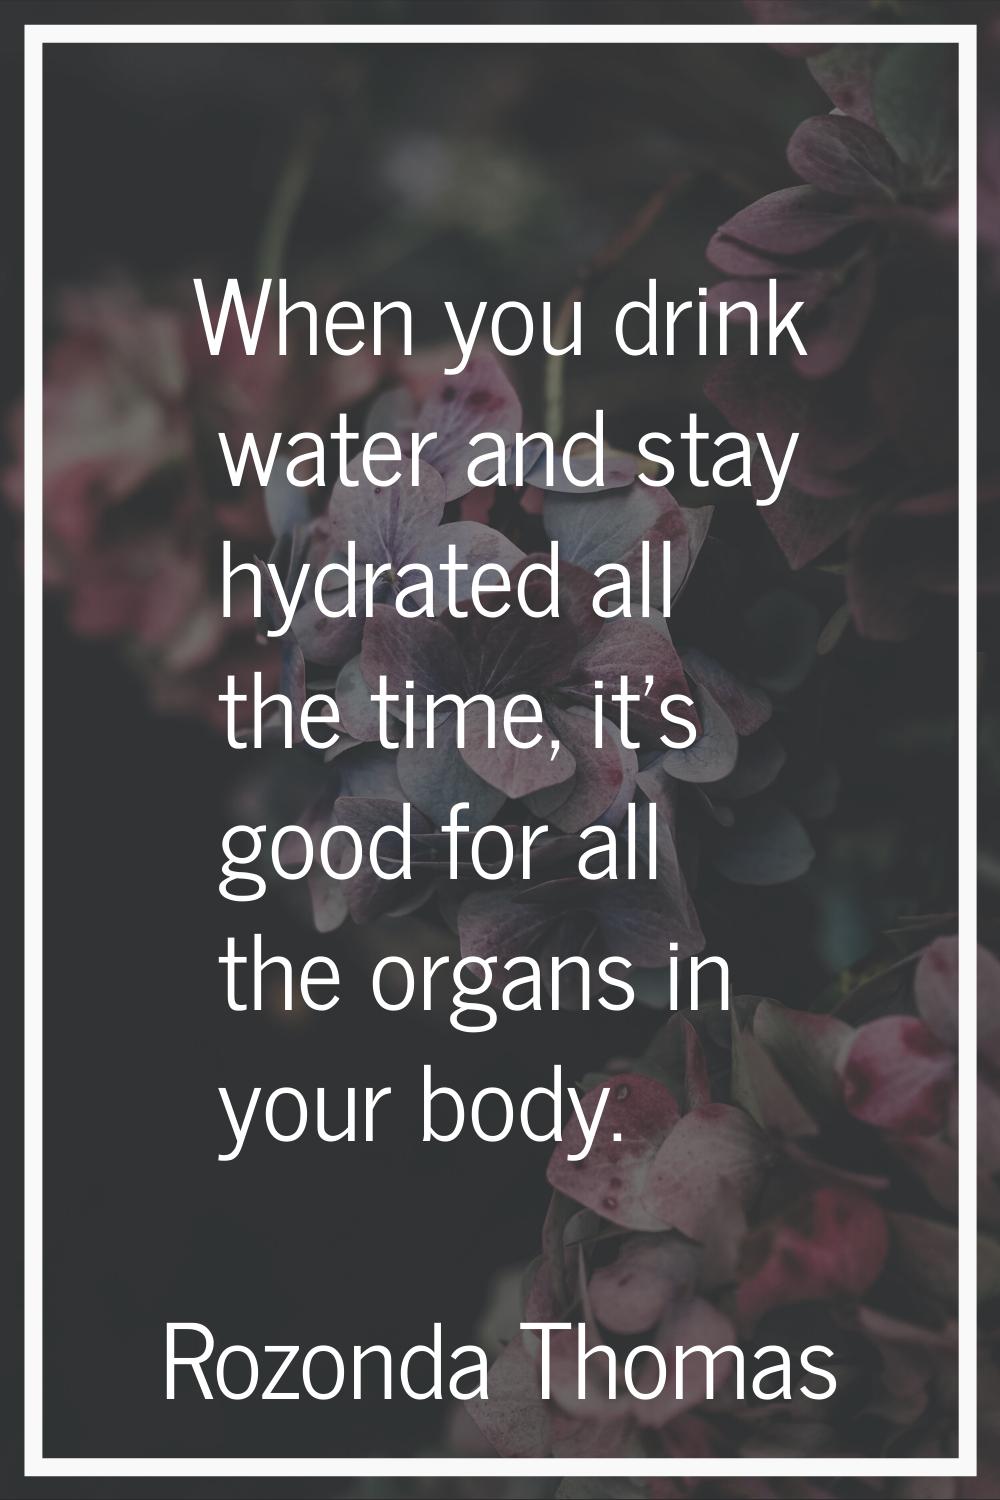 When you drink water and stay hydrated all the time, it's good for all the organs in your body.